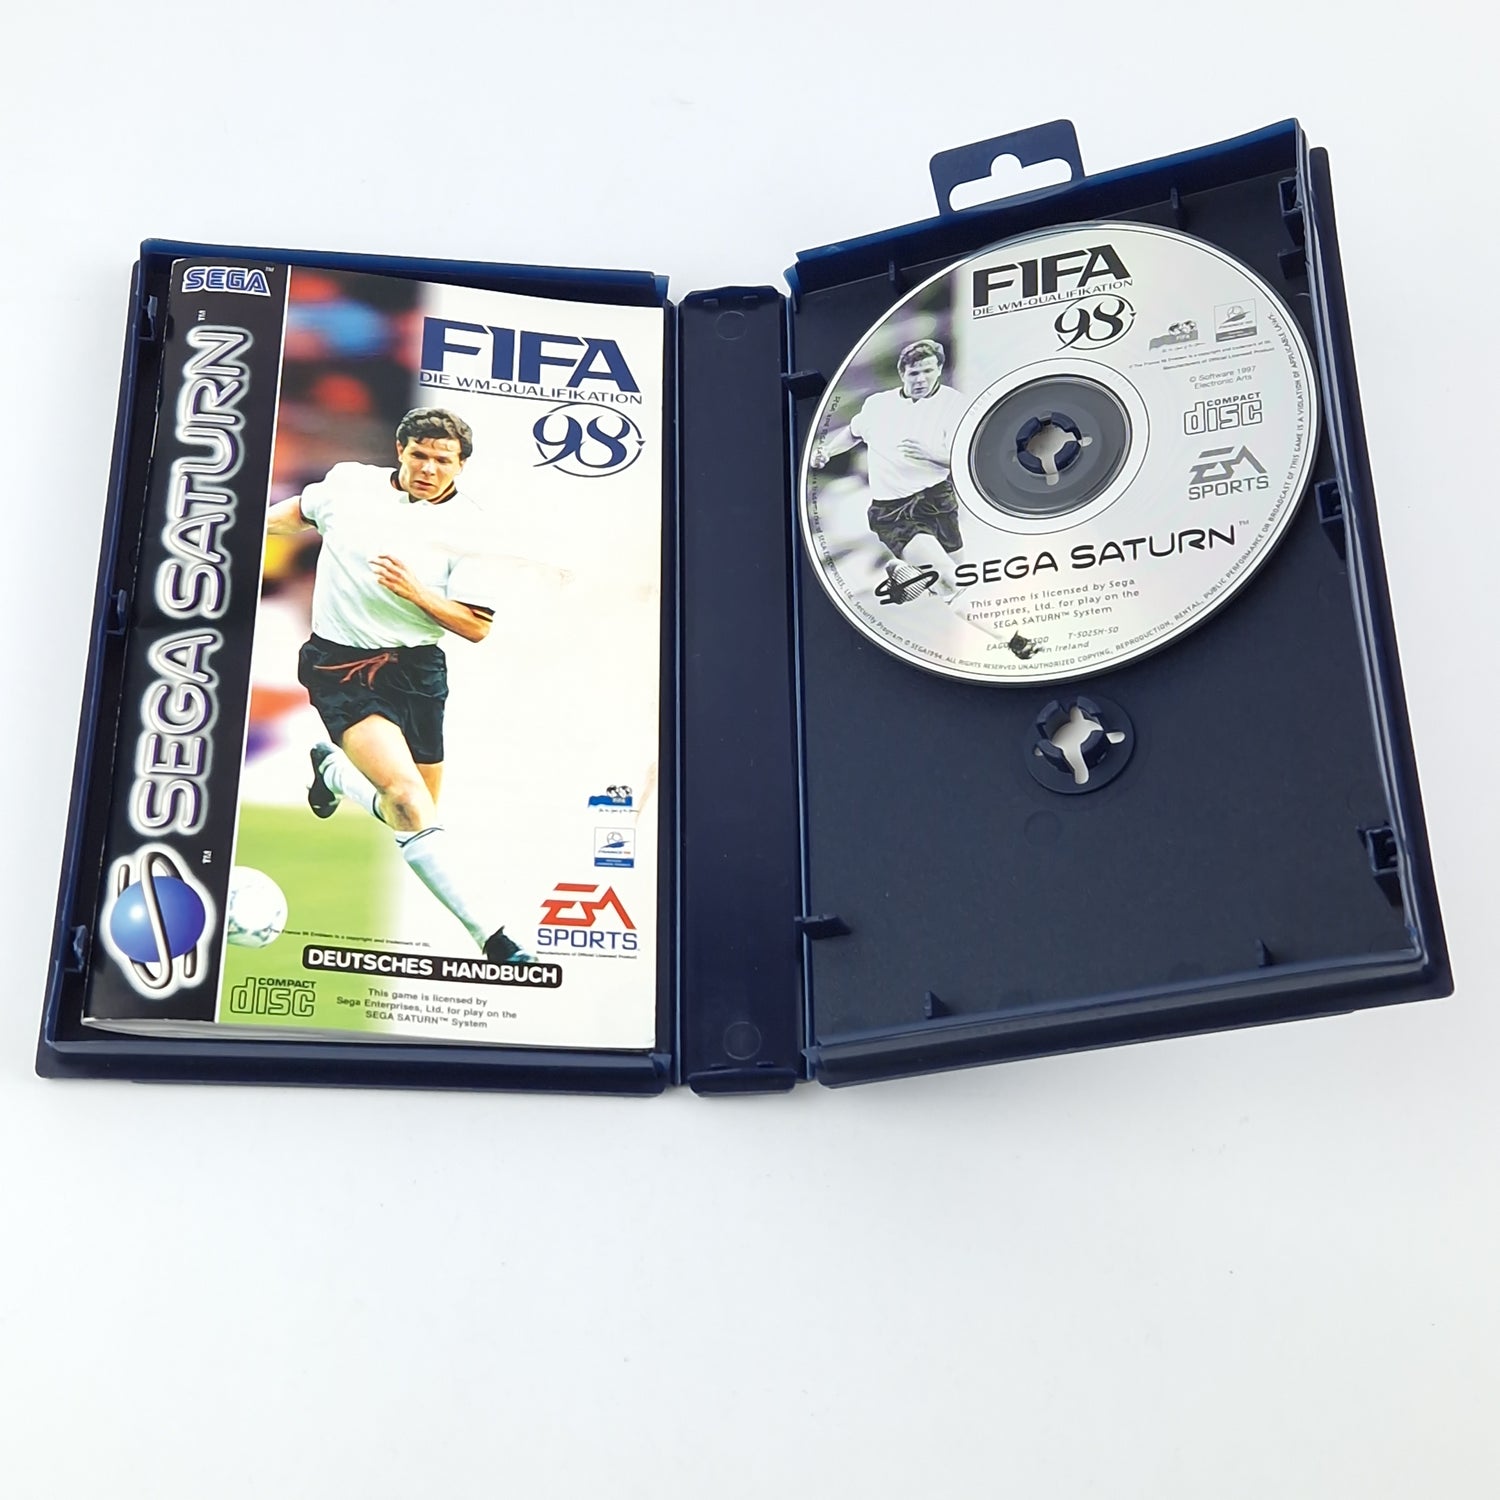 Sega Saturn Game: Fifa 98 The World Cup Qualification - CD Instructions Original Packaging / Football